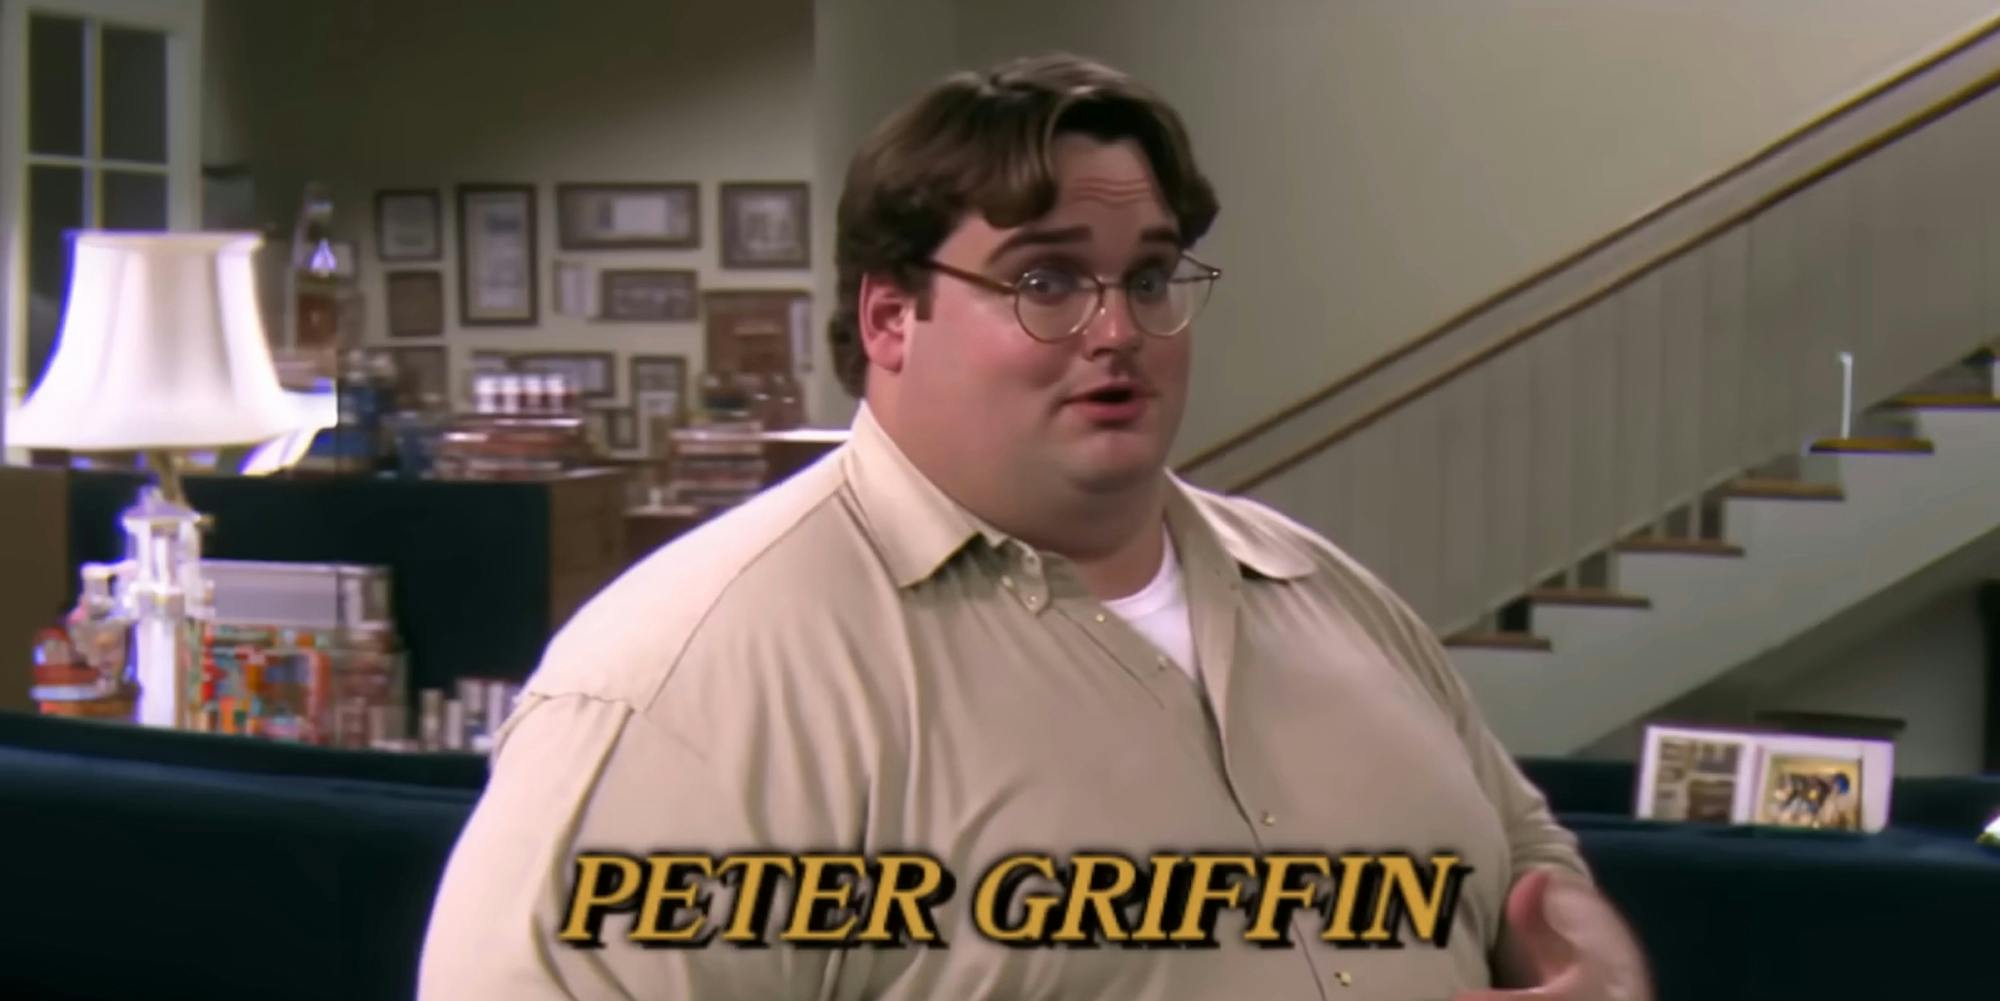 AI Peter Griffin in 80's style sitcom with "Peter Griffin" at bottom